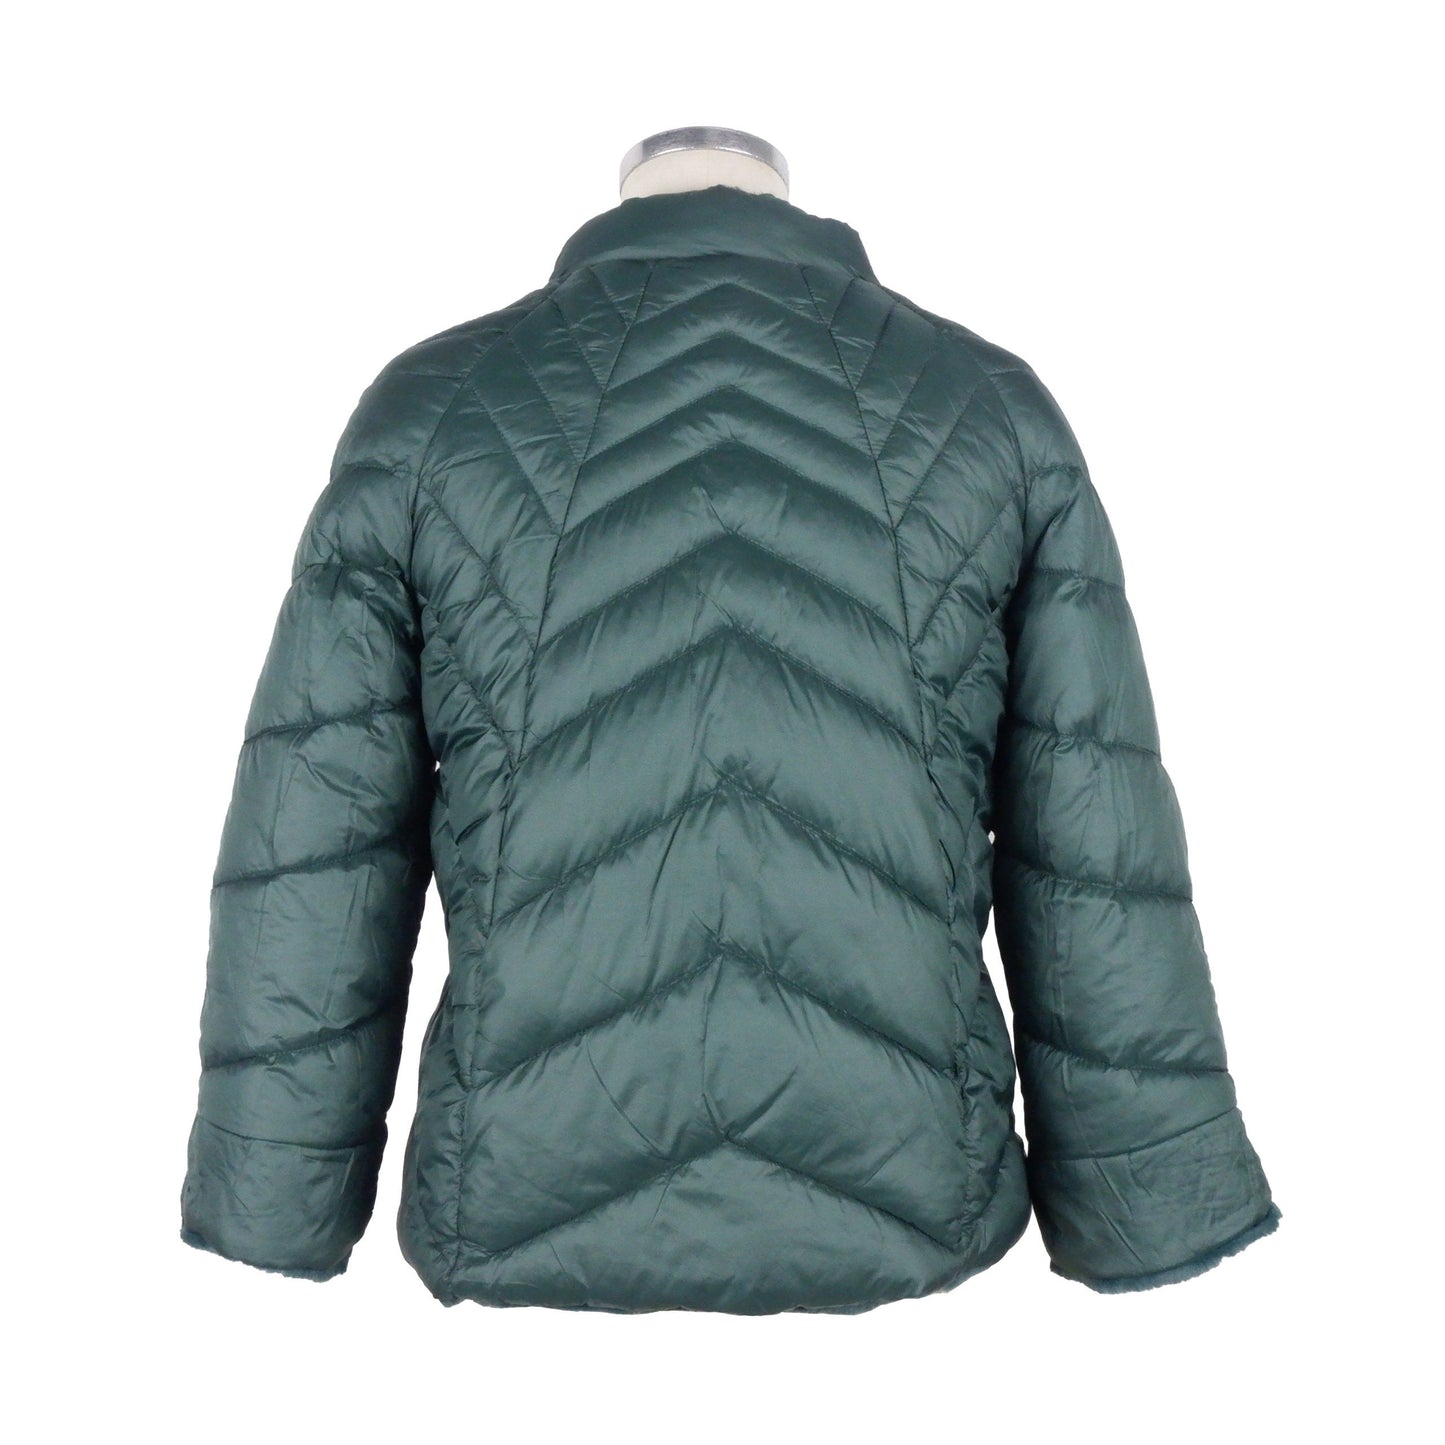 Chic Reversible Hooded Down Jacket - Green